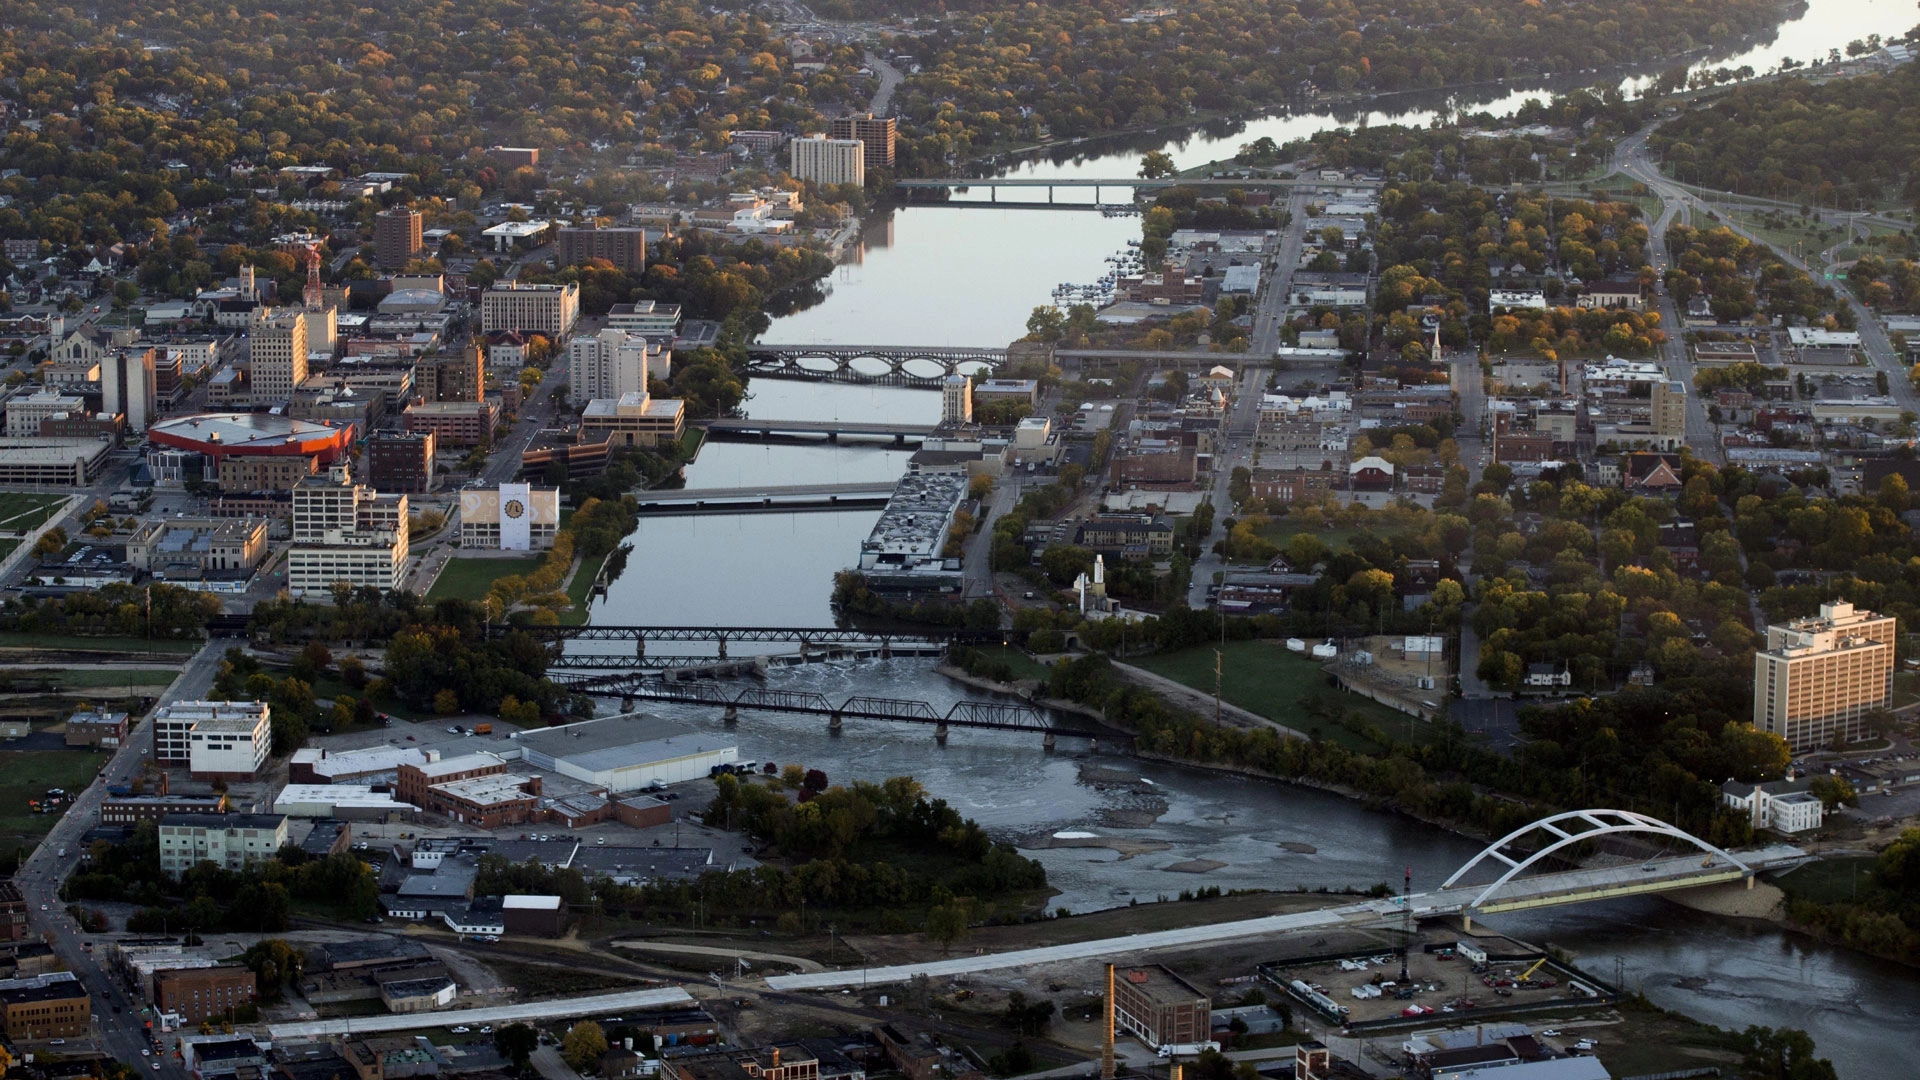 Aerial image of downtown Rockford, Illinois, looking north, with view of the Rock River.